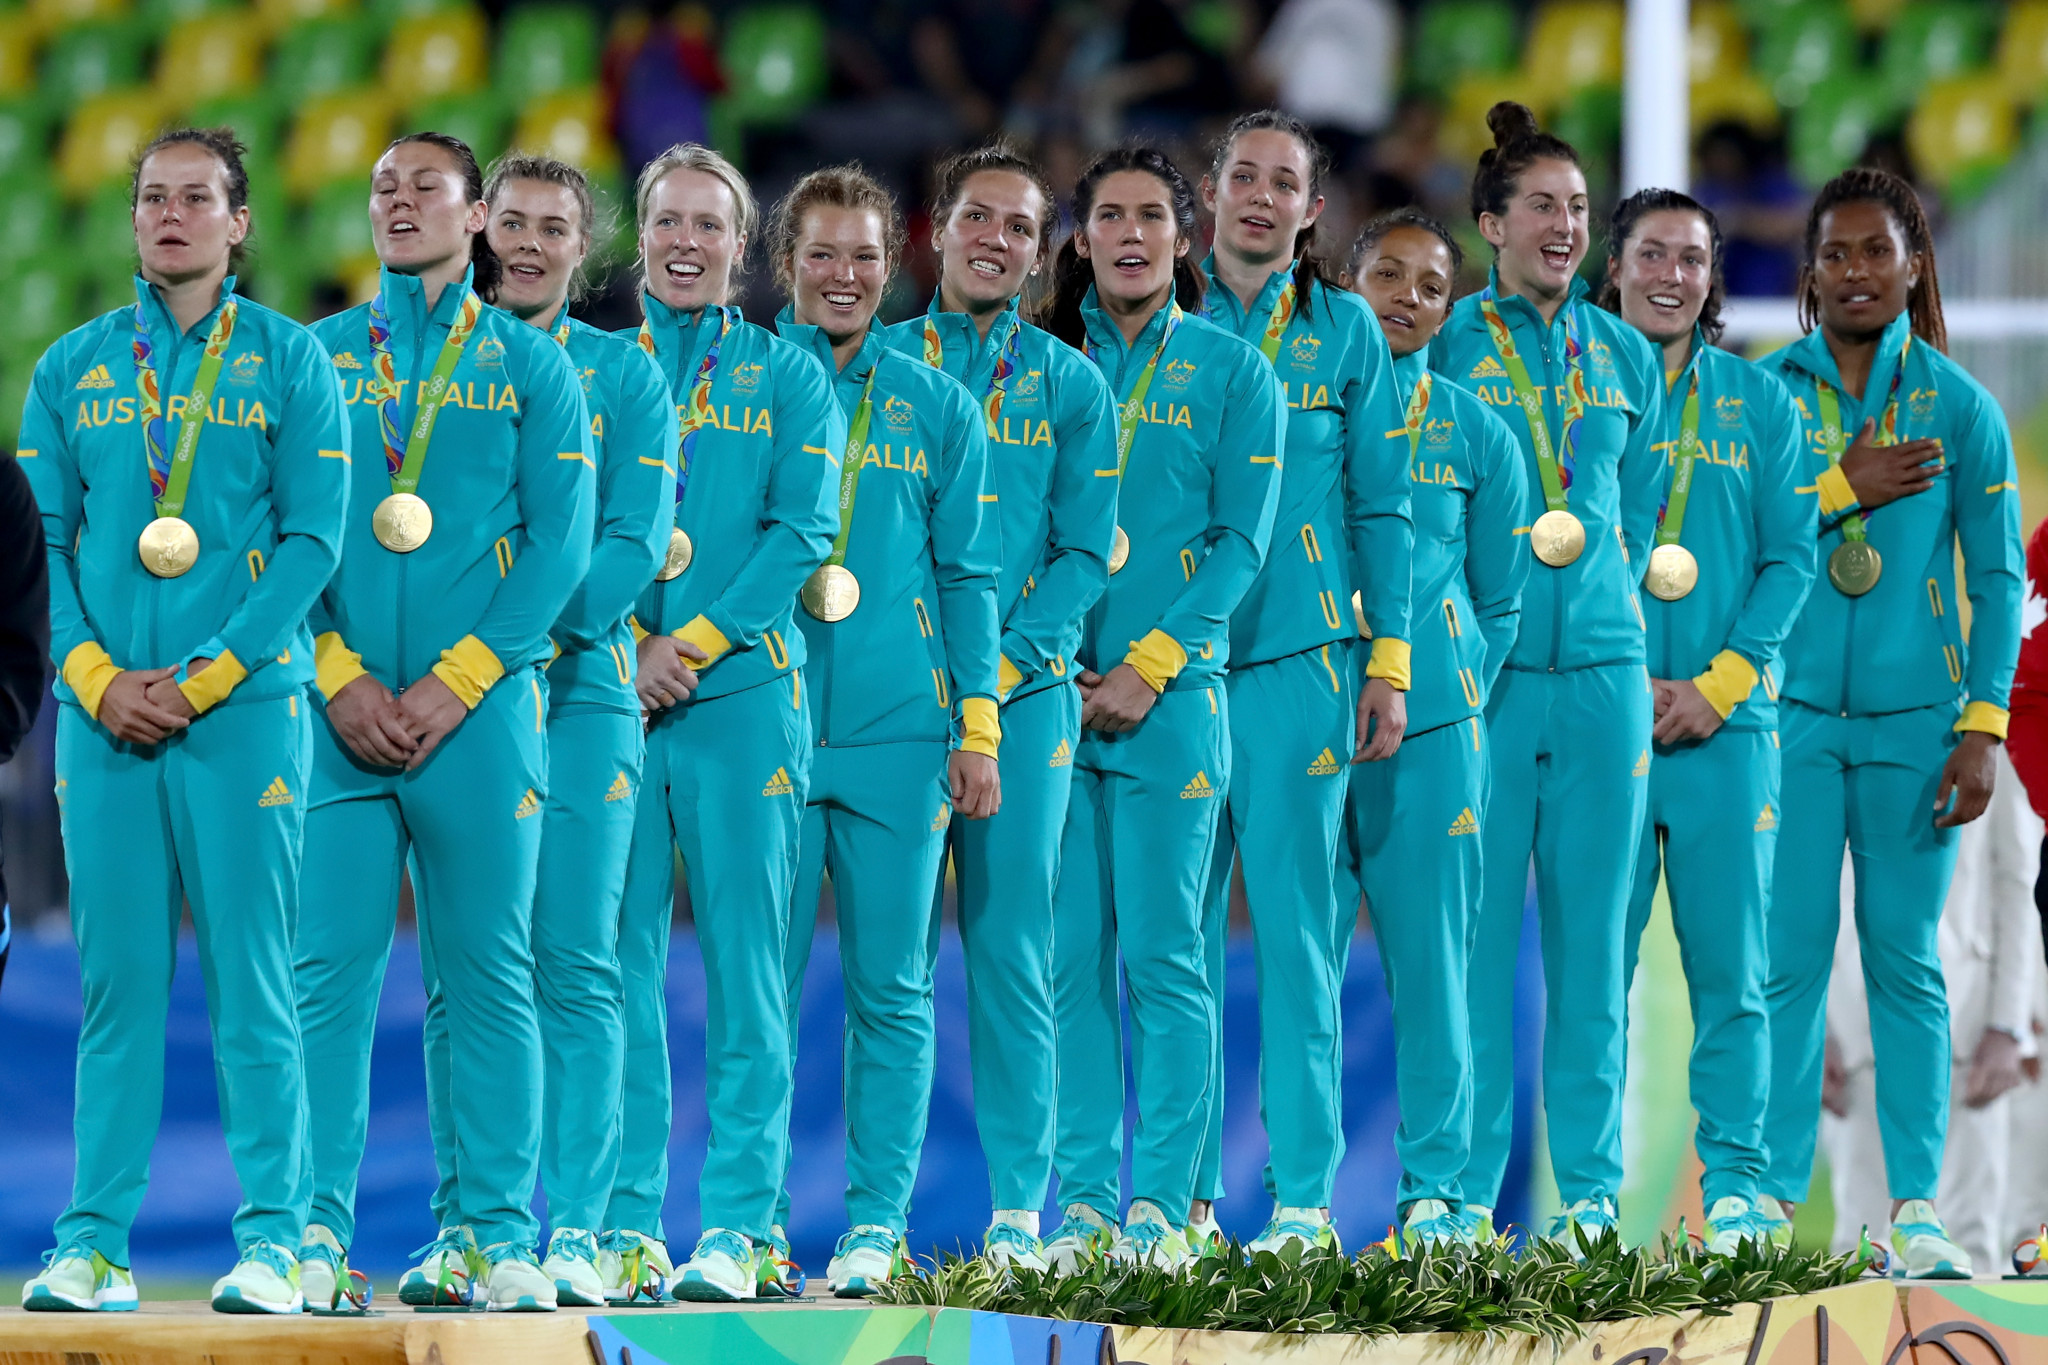 Australia's women won gold in the rugby sevens competition at Rio 2016 ©Getty Images